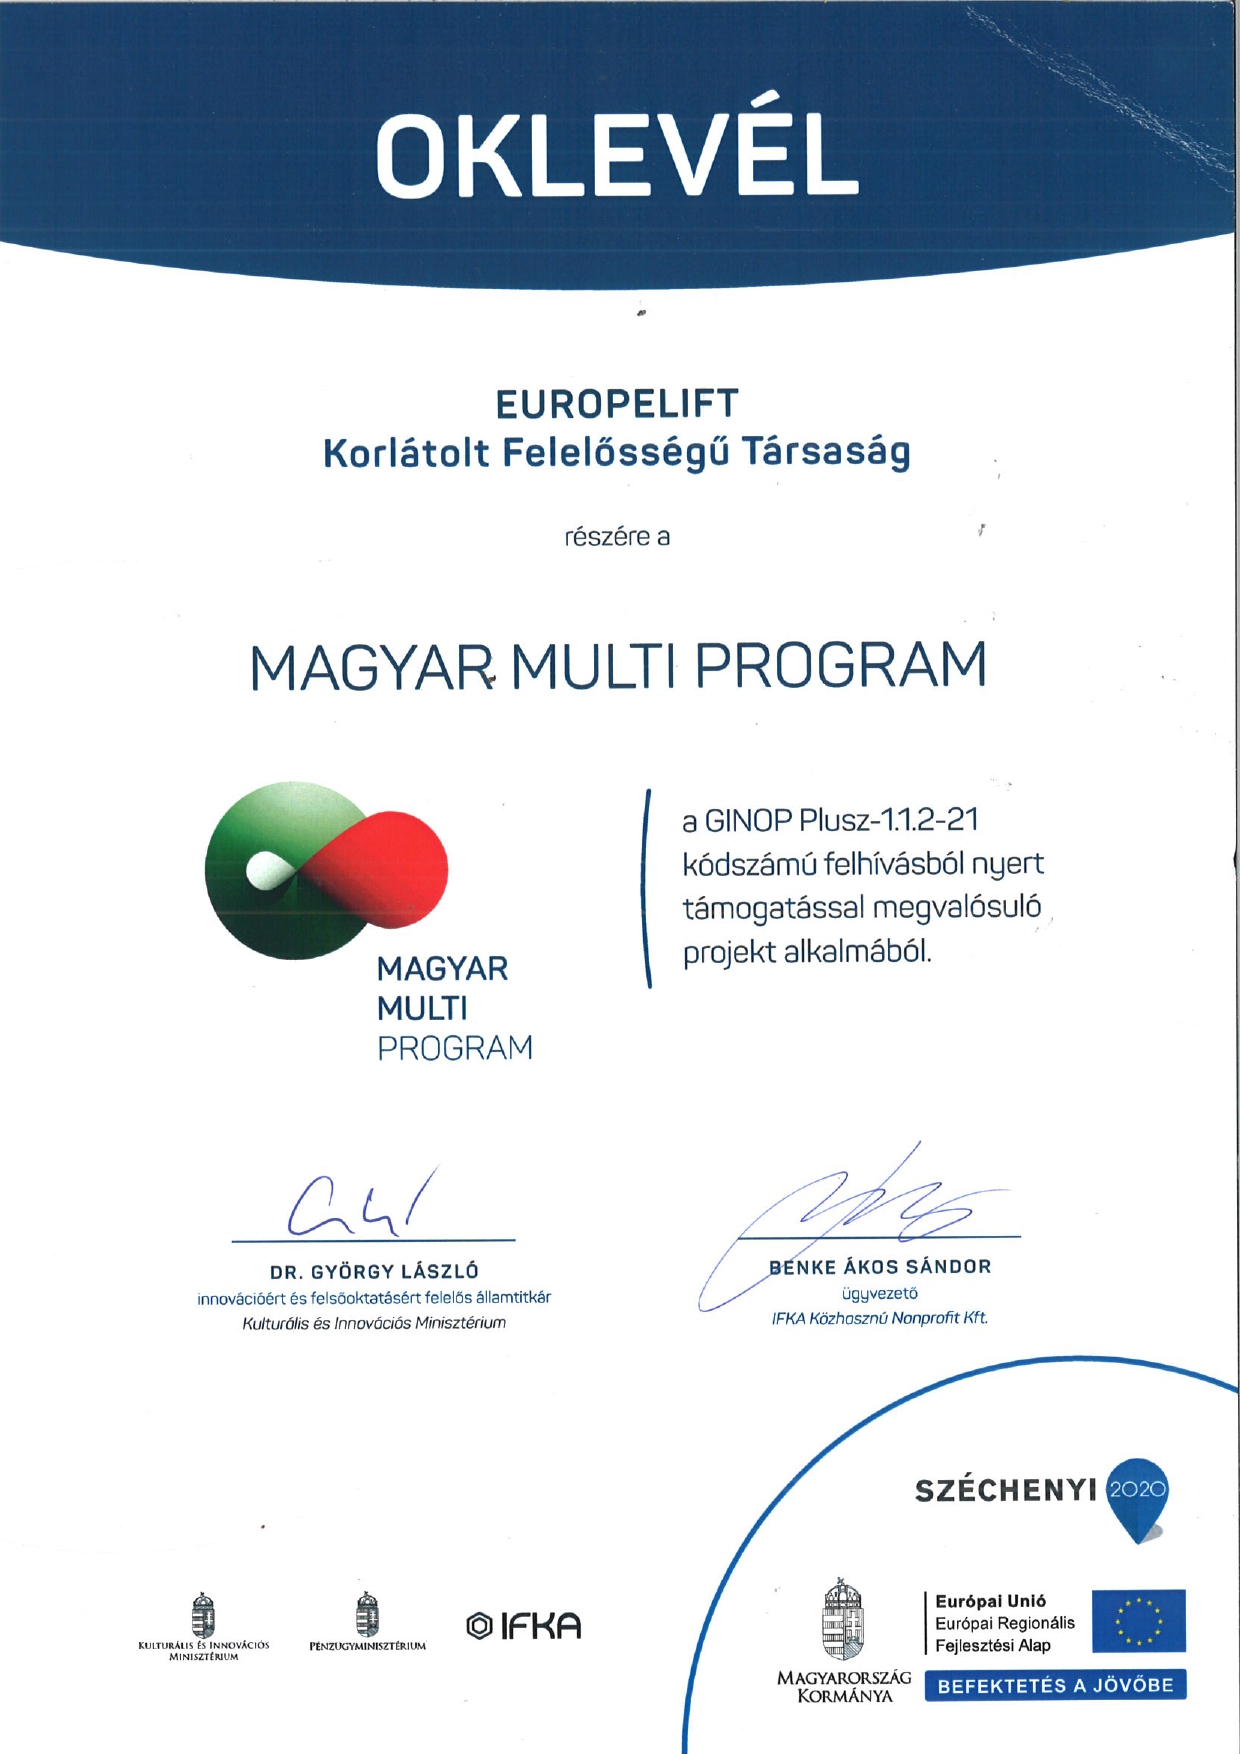 Awarding of certificates to enterprises participating in the 2021 round of the Hungarian Multi Program and receiving funding from tenders